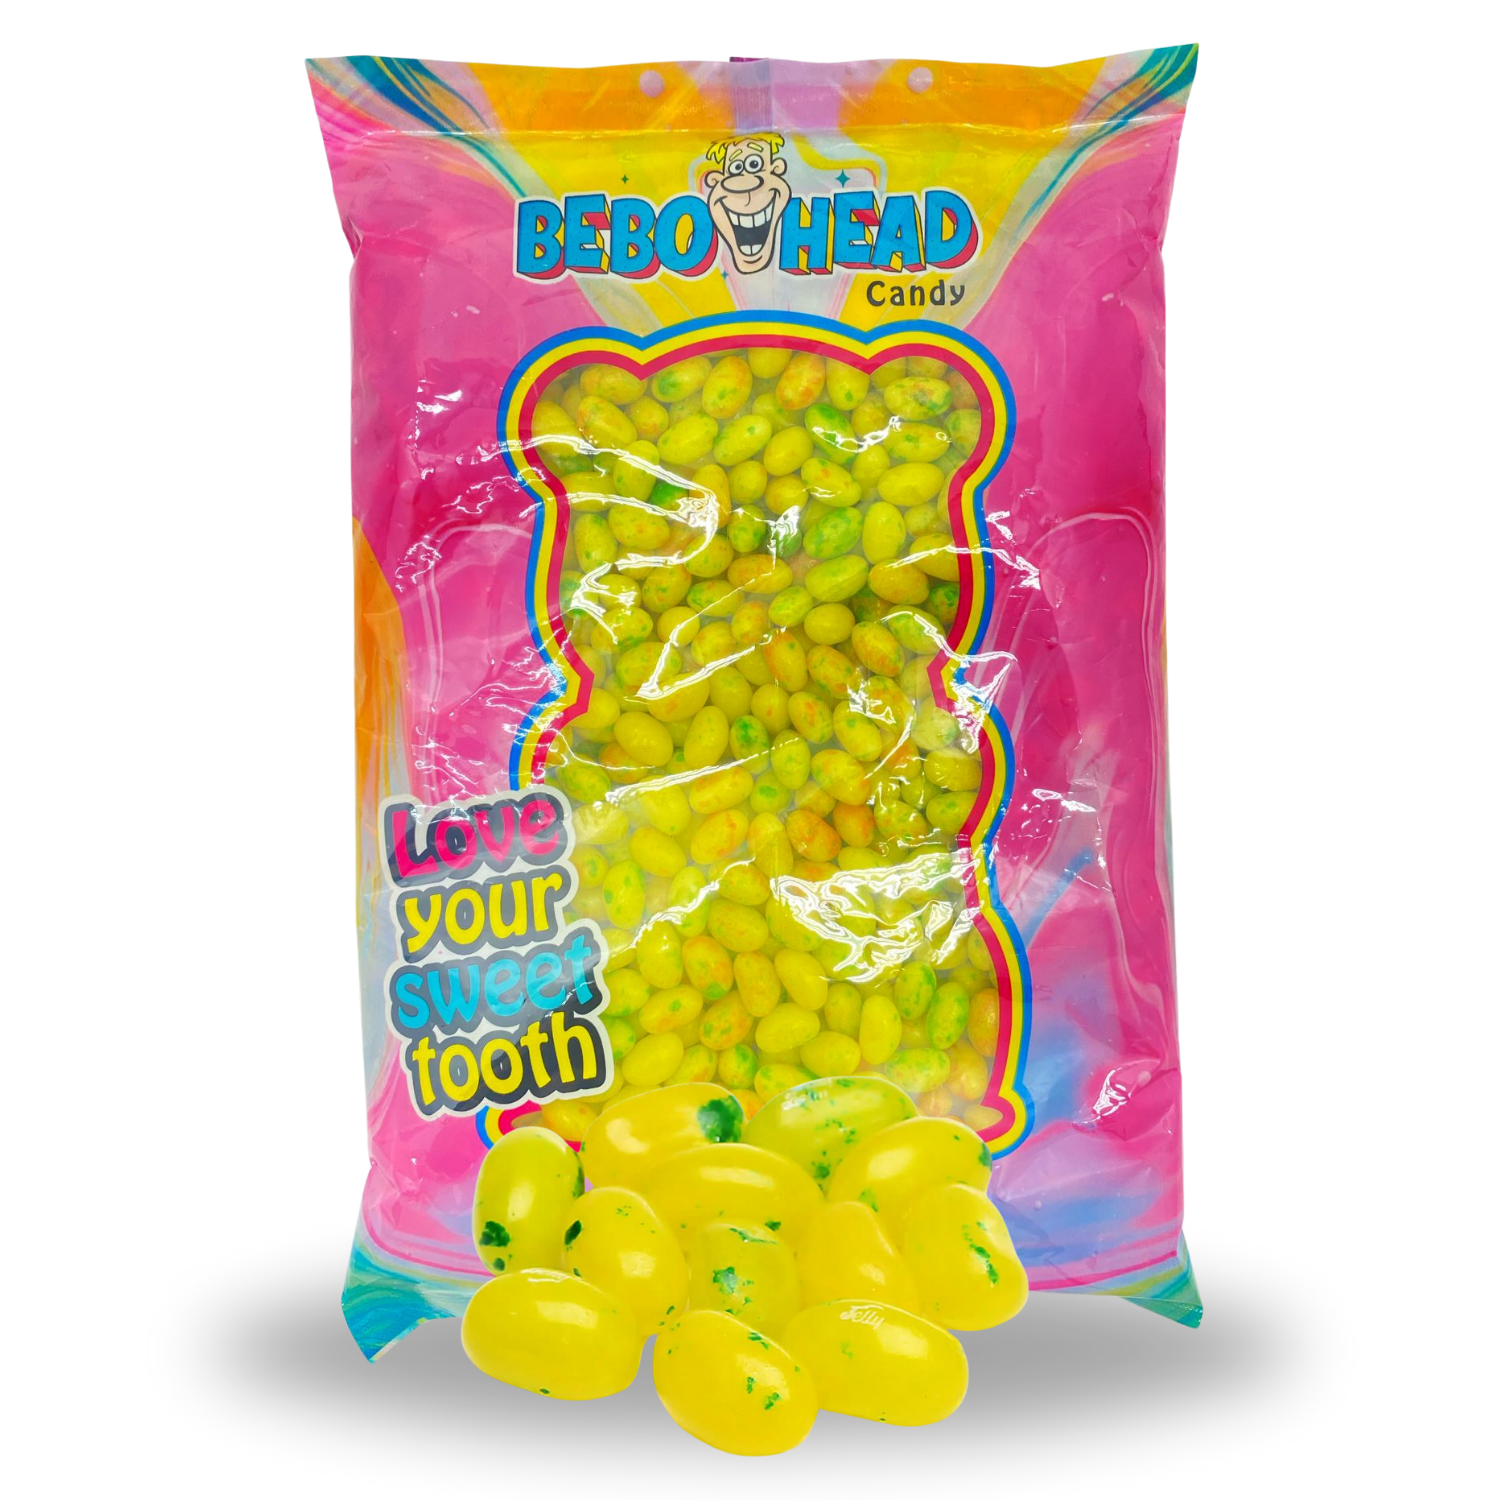 Tropical Fruit Jelly Beans - 2.2 Pounds